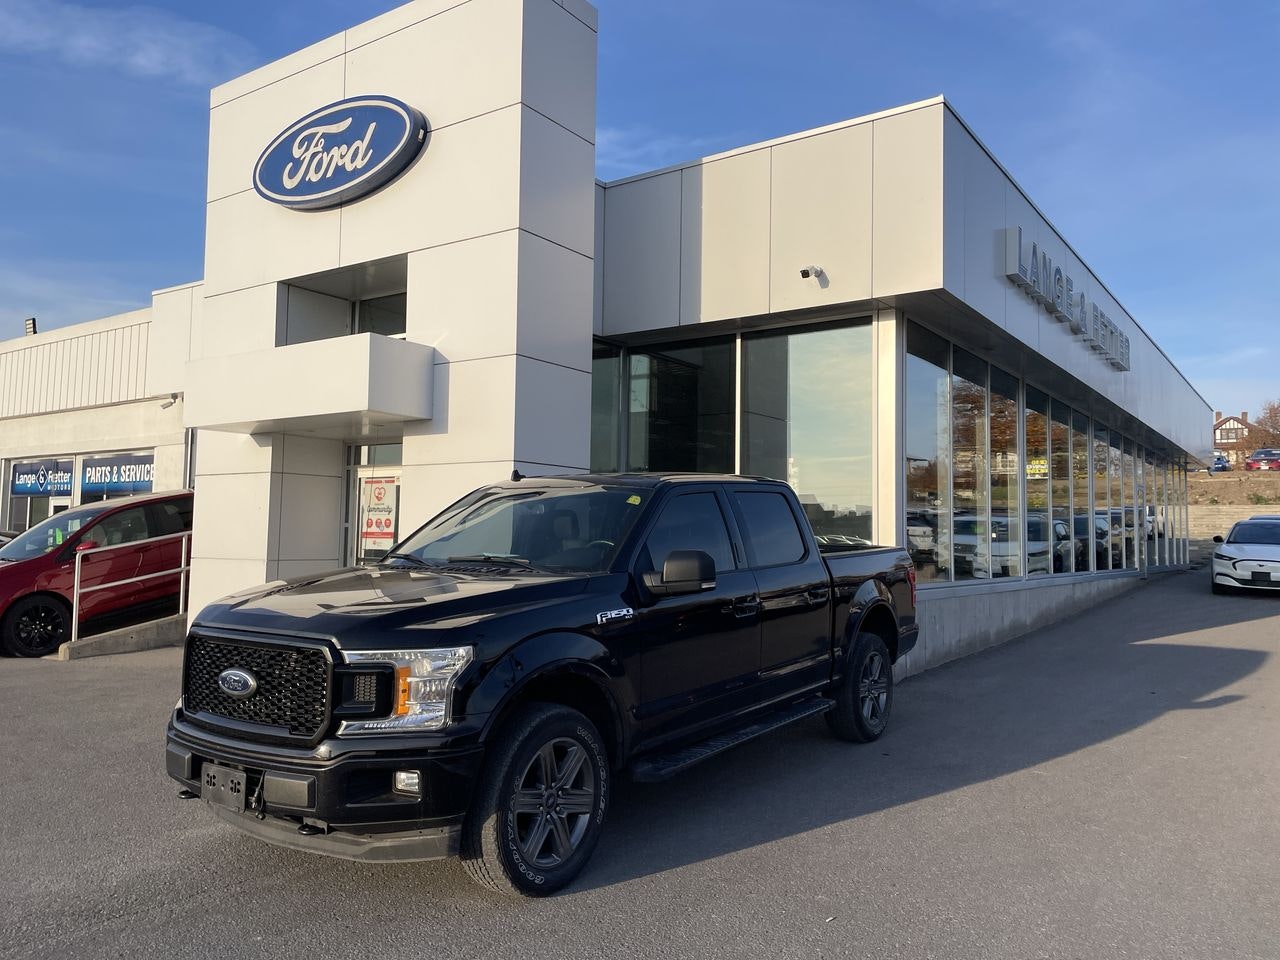 2020 Ford F-150 - 21381A Full Image 1